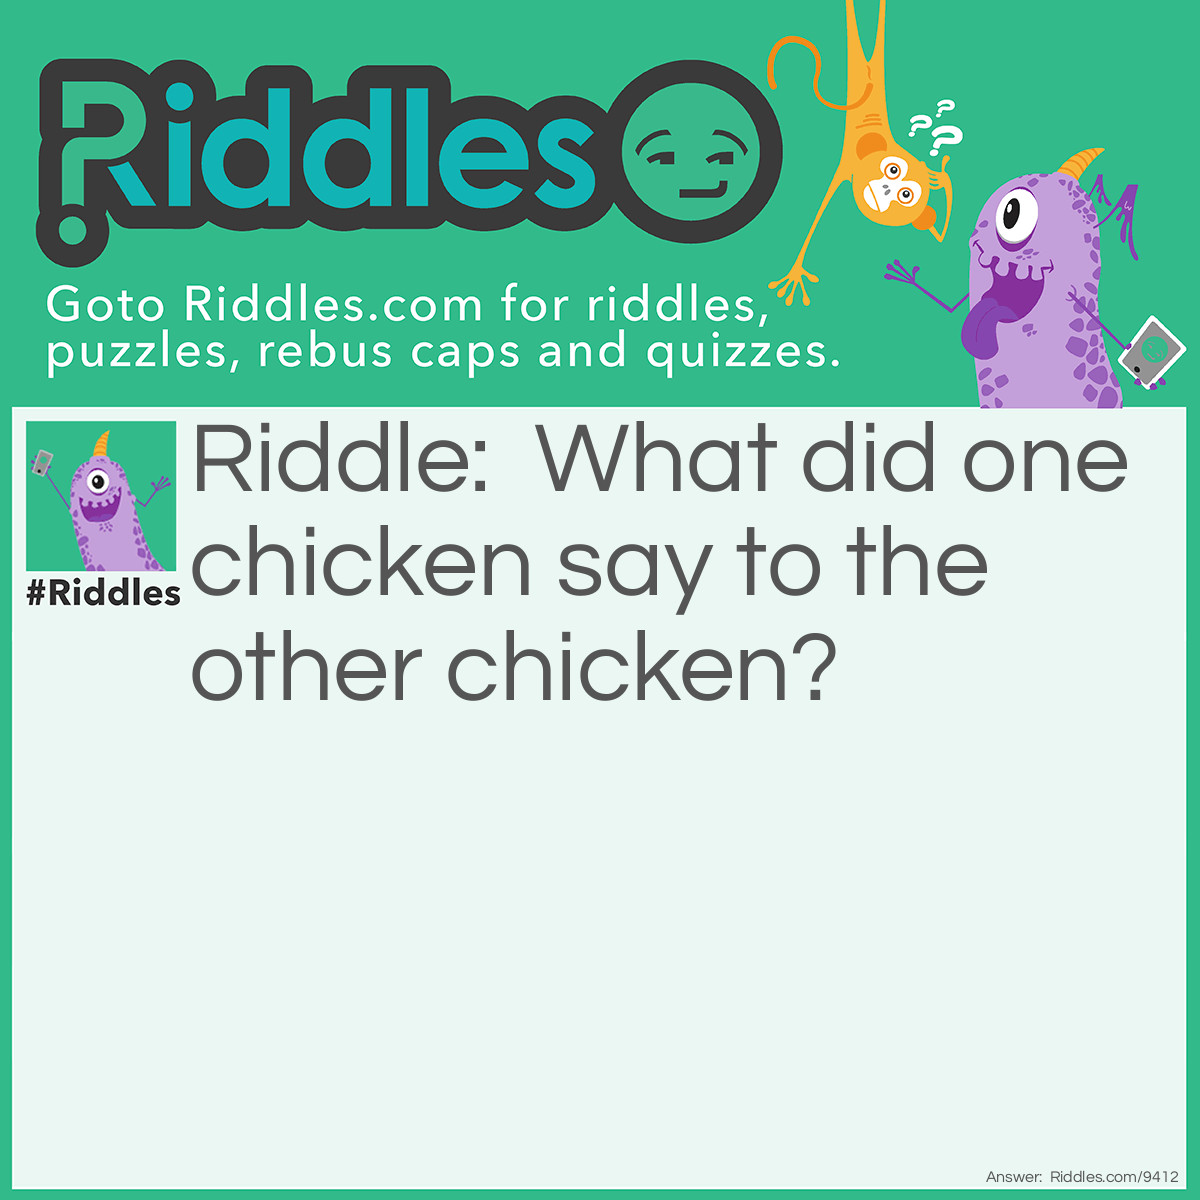 Riddle: What did one chicken say to the other chicken? Answer: Cluck cluck!!